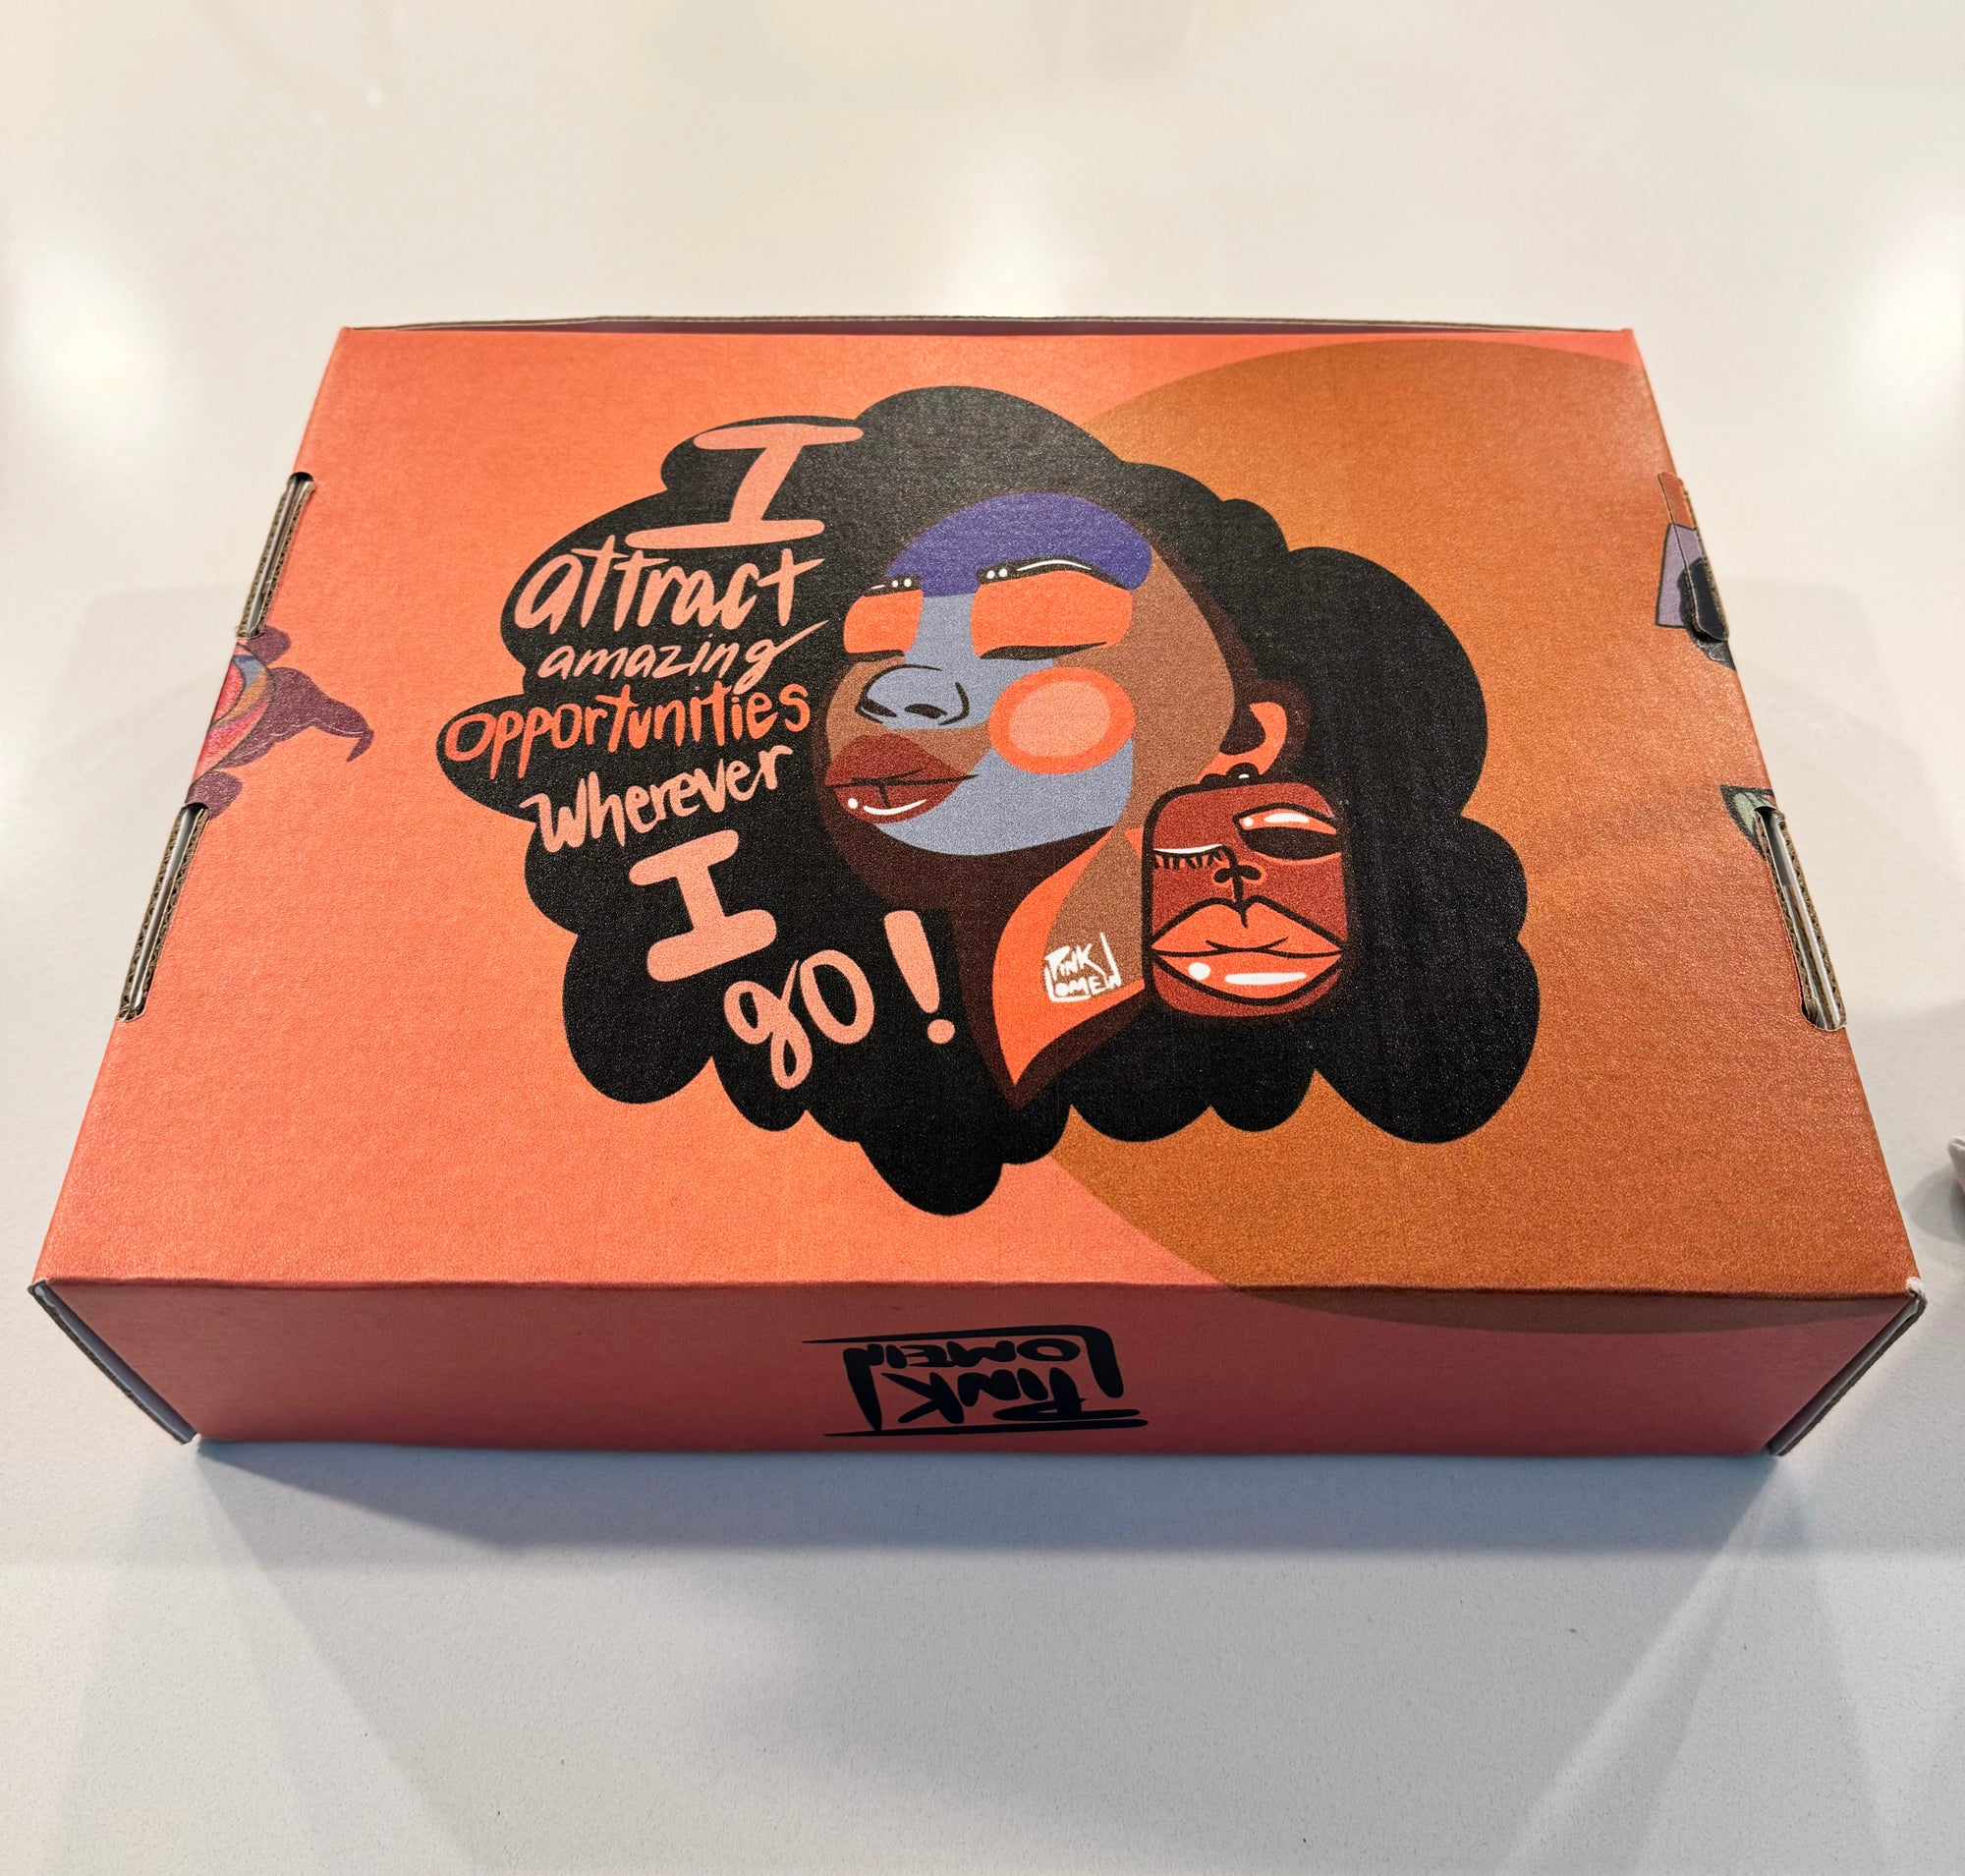 The Limited Edition Black Friday Box